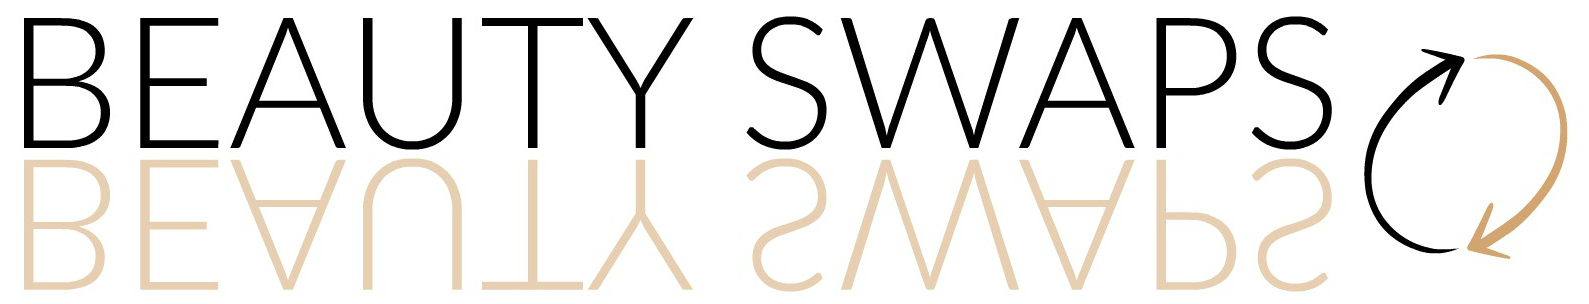 Beauty Swaps Logo Cropped BIG tight